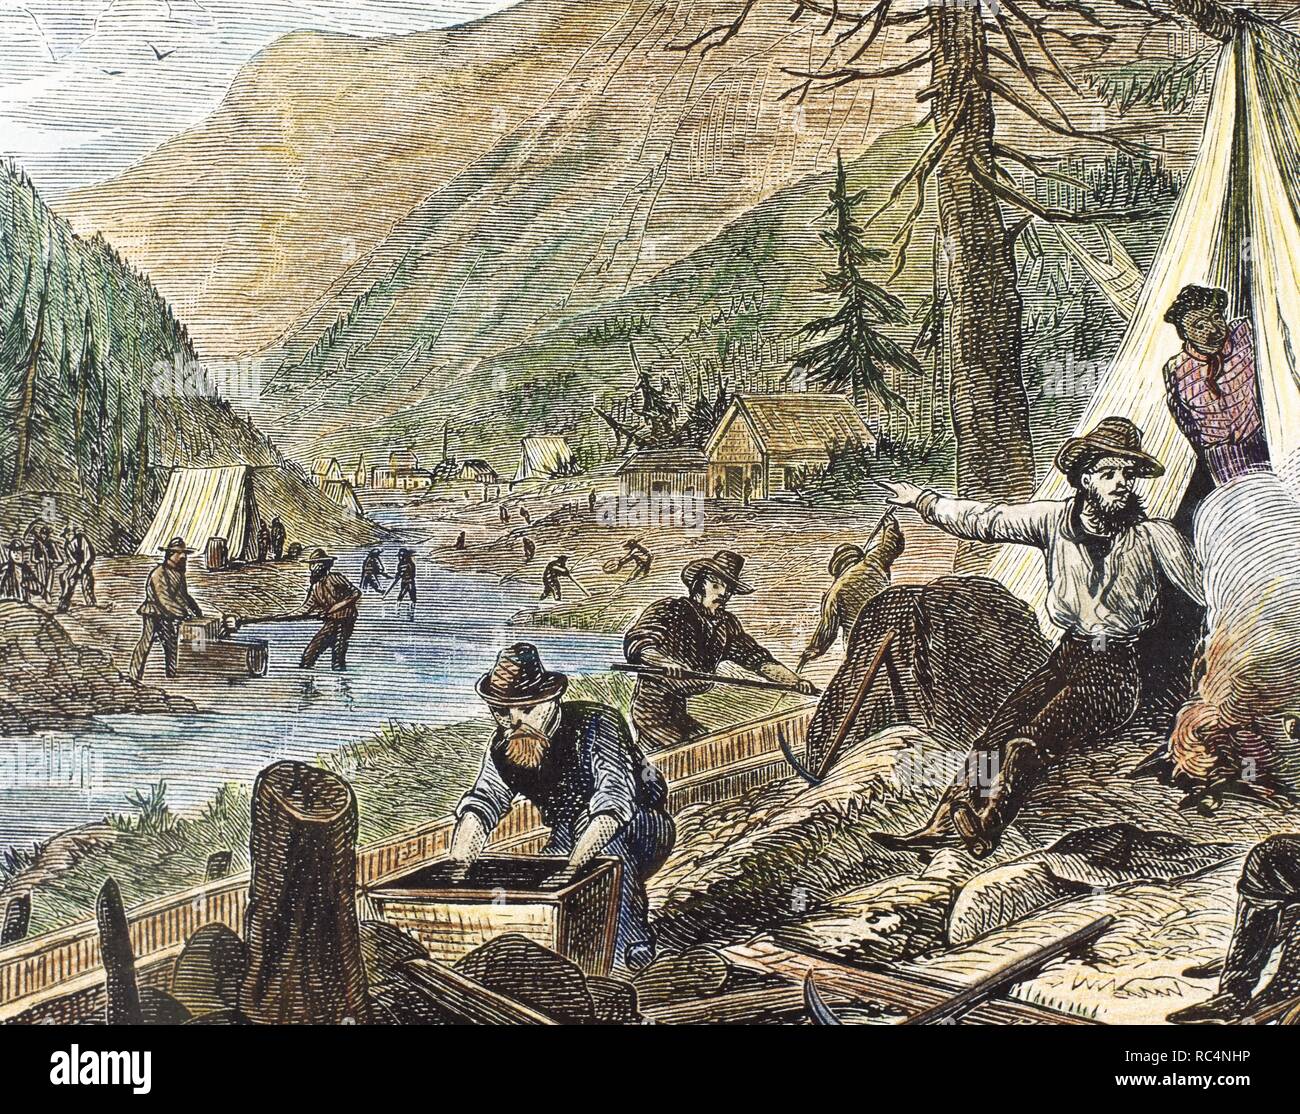 Travel: Relive the gold rush in California's Tuolumne County - Victoria  Times Colonist